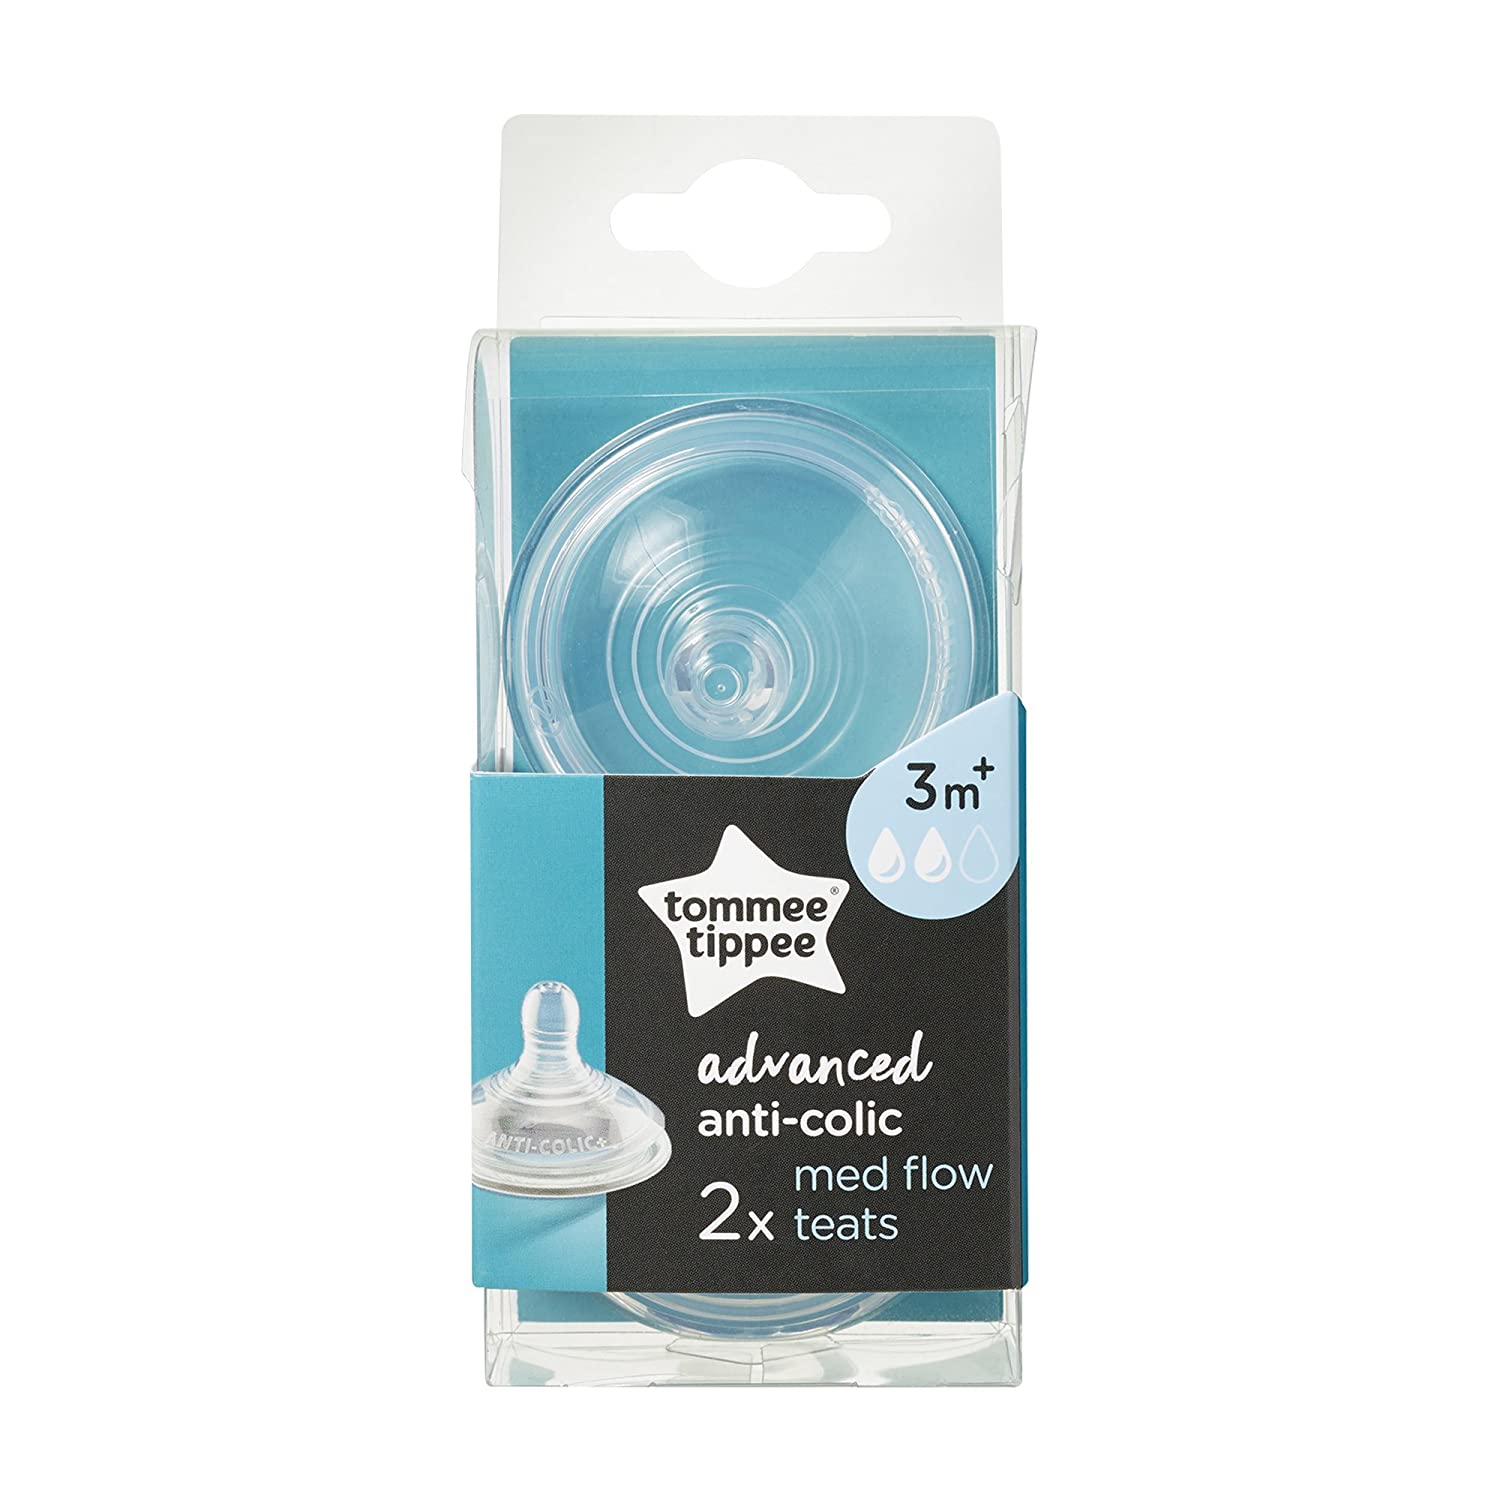 Tommee Tippee Advanced Anti-Colic Medium Flow Teats 3m+ (Pack of 2)